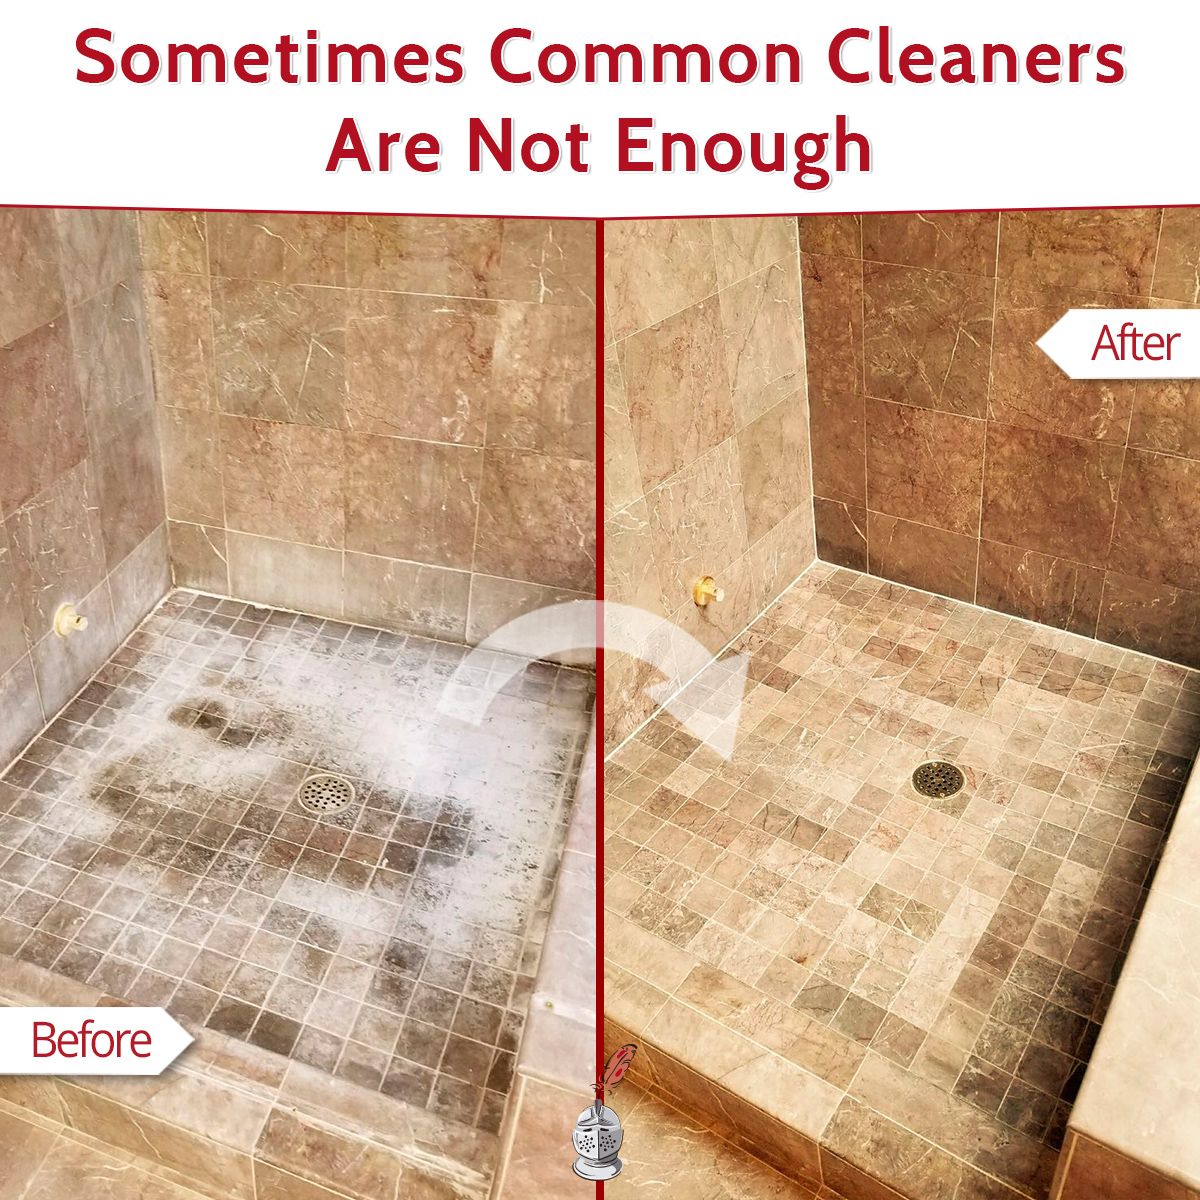 Sometimes Common Cleaners Are Not Enough